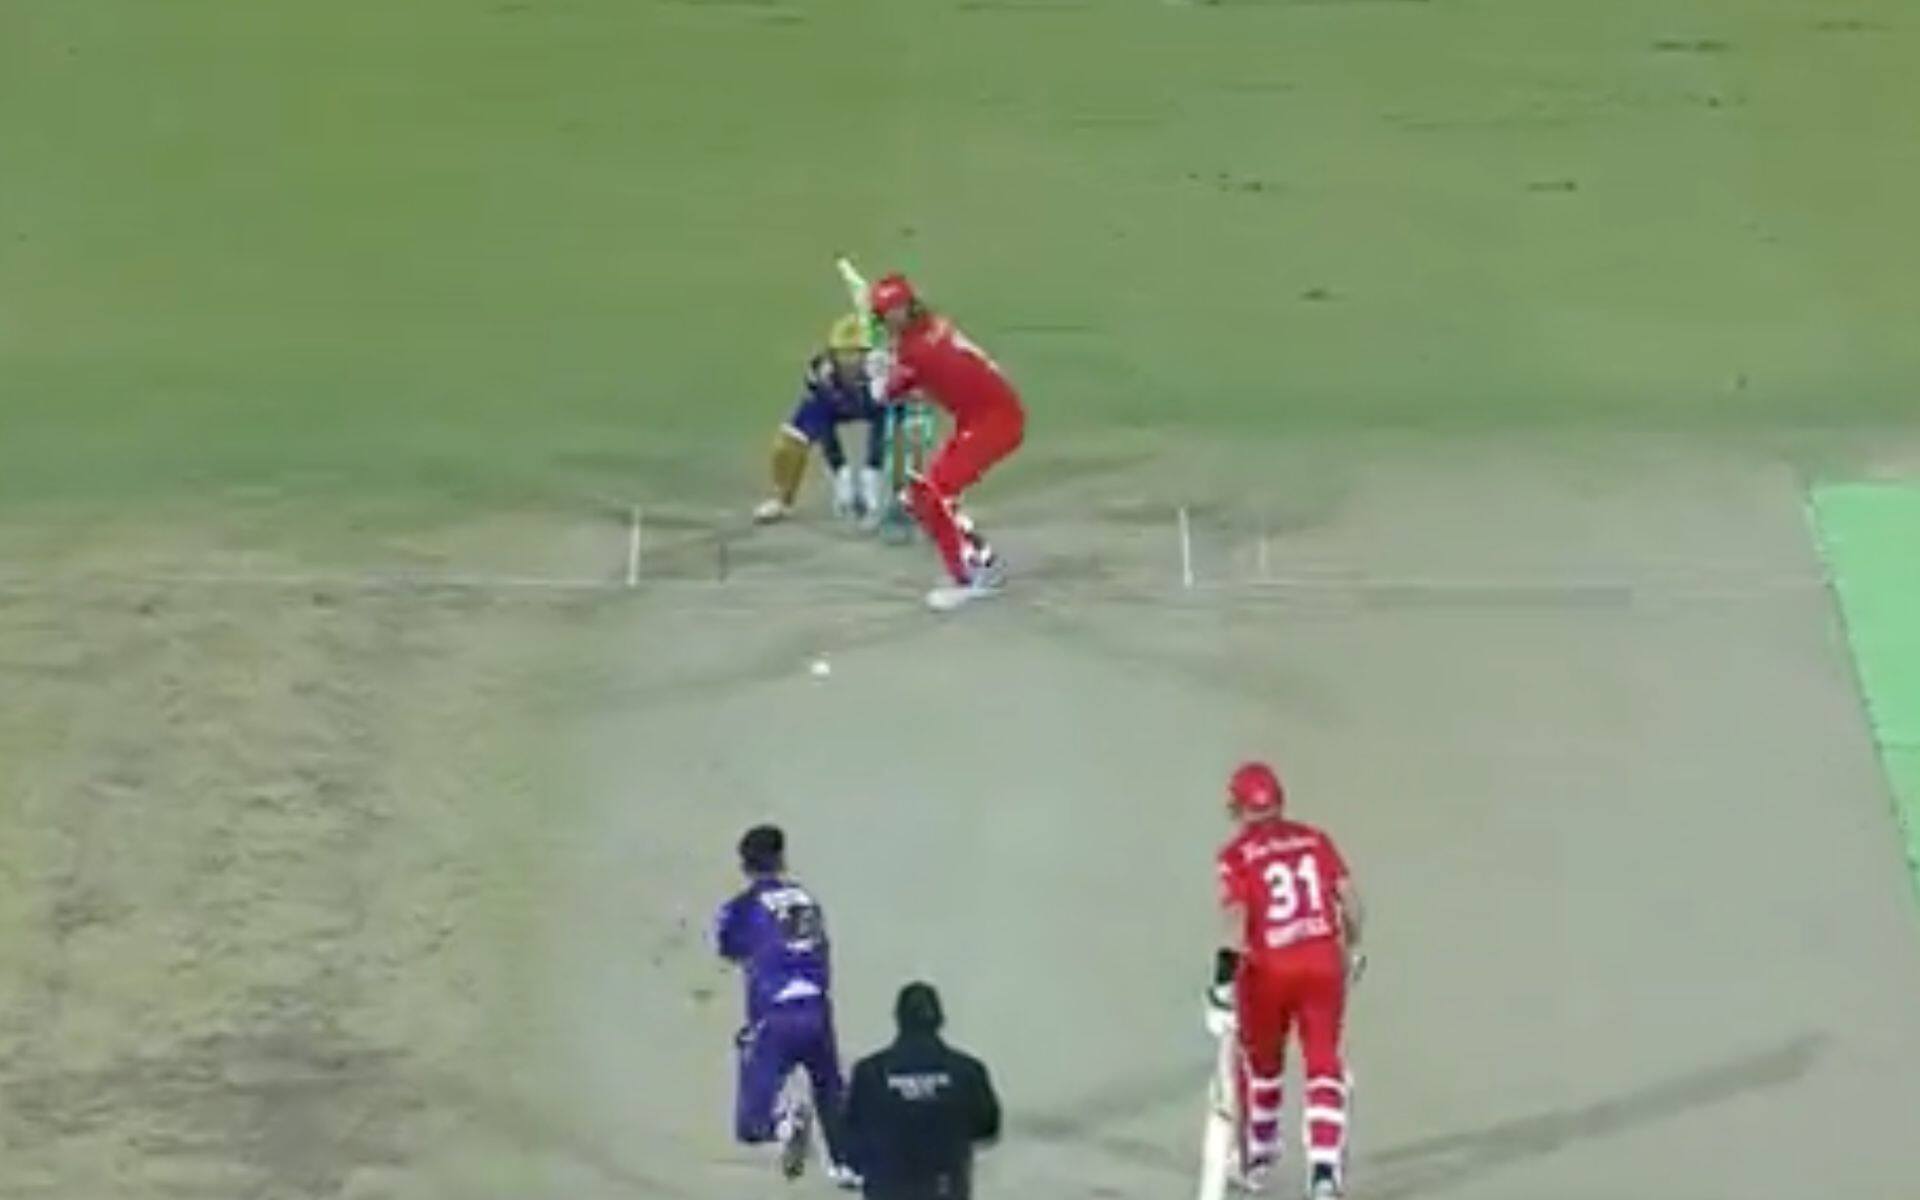 Alex Hales launched Abrar Ahmed out of the ground twice in one over (x.com)